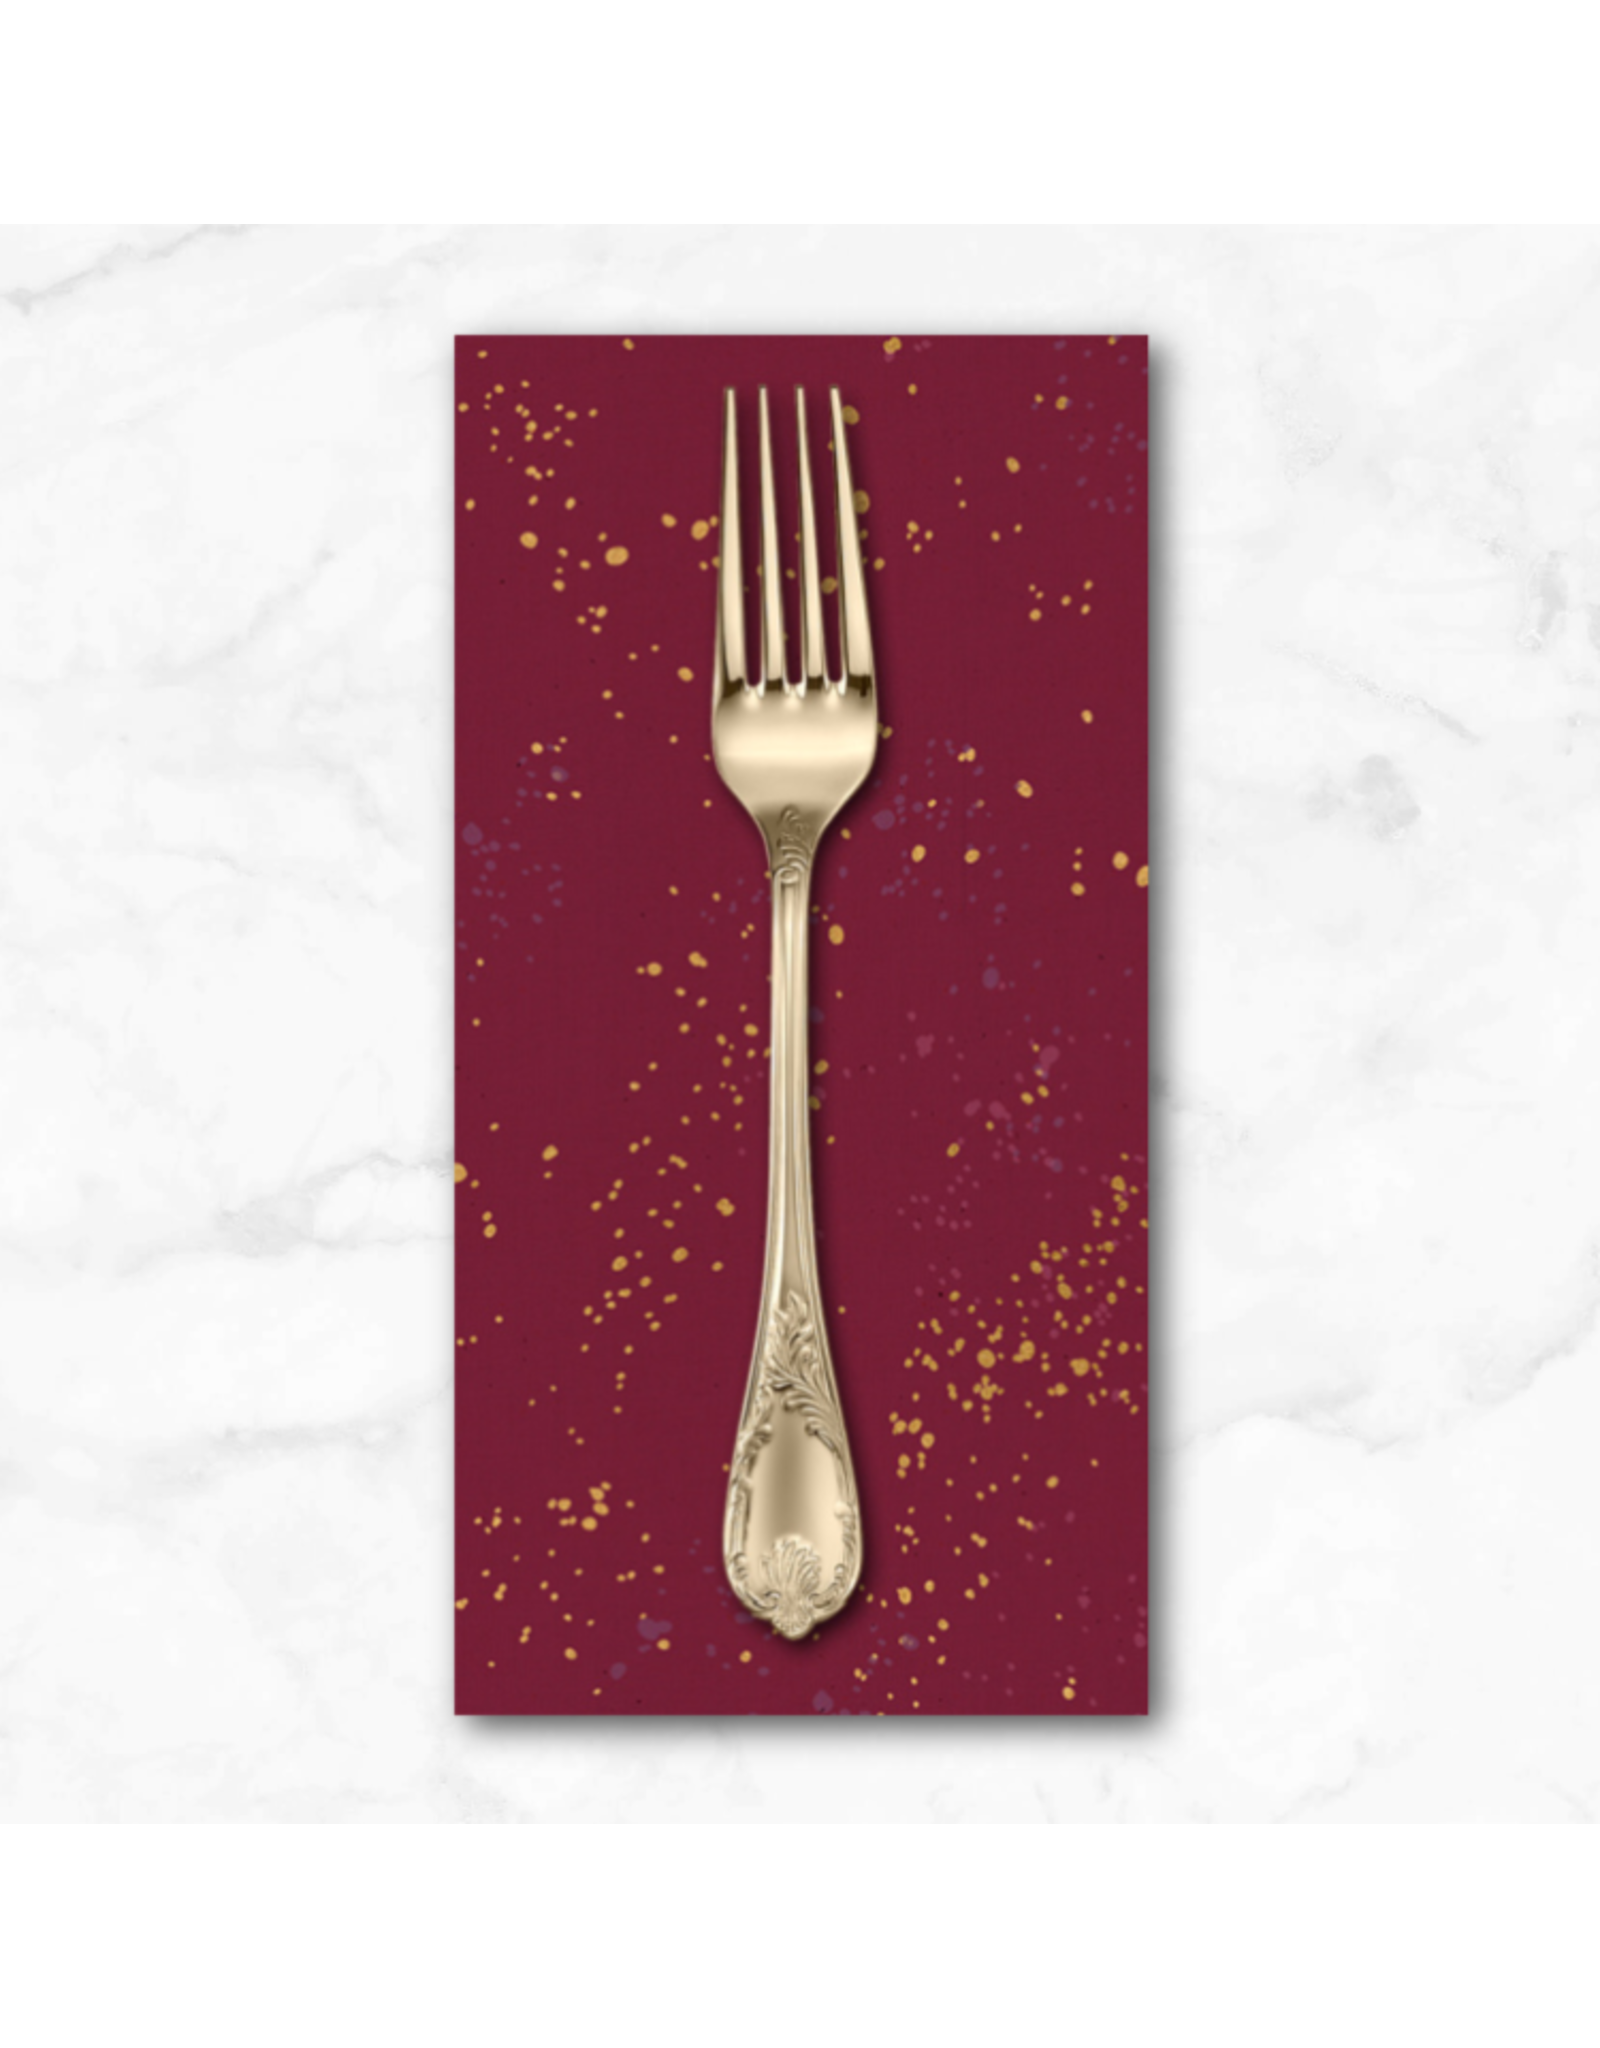 PD's Ruby Star Society Collection Speckled Metallic in Wine Time, Dinner Napkin